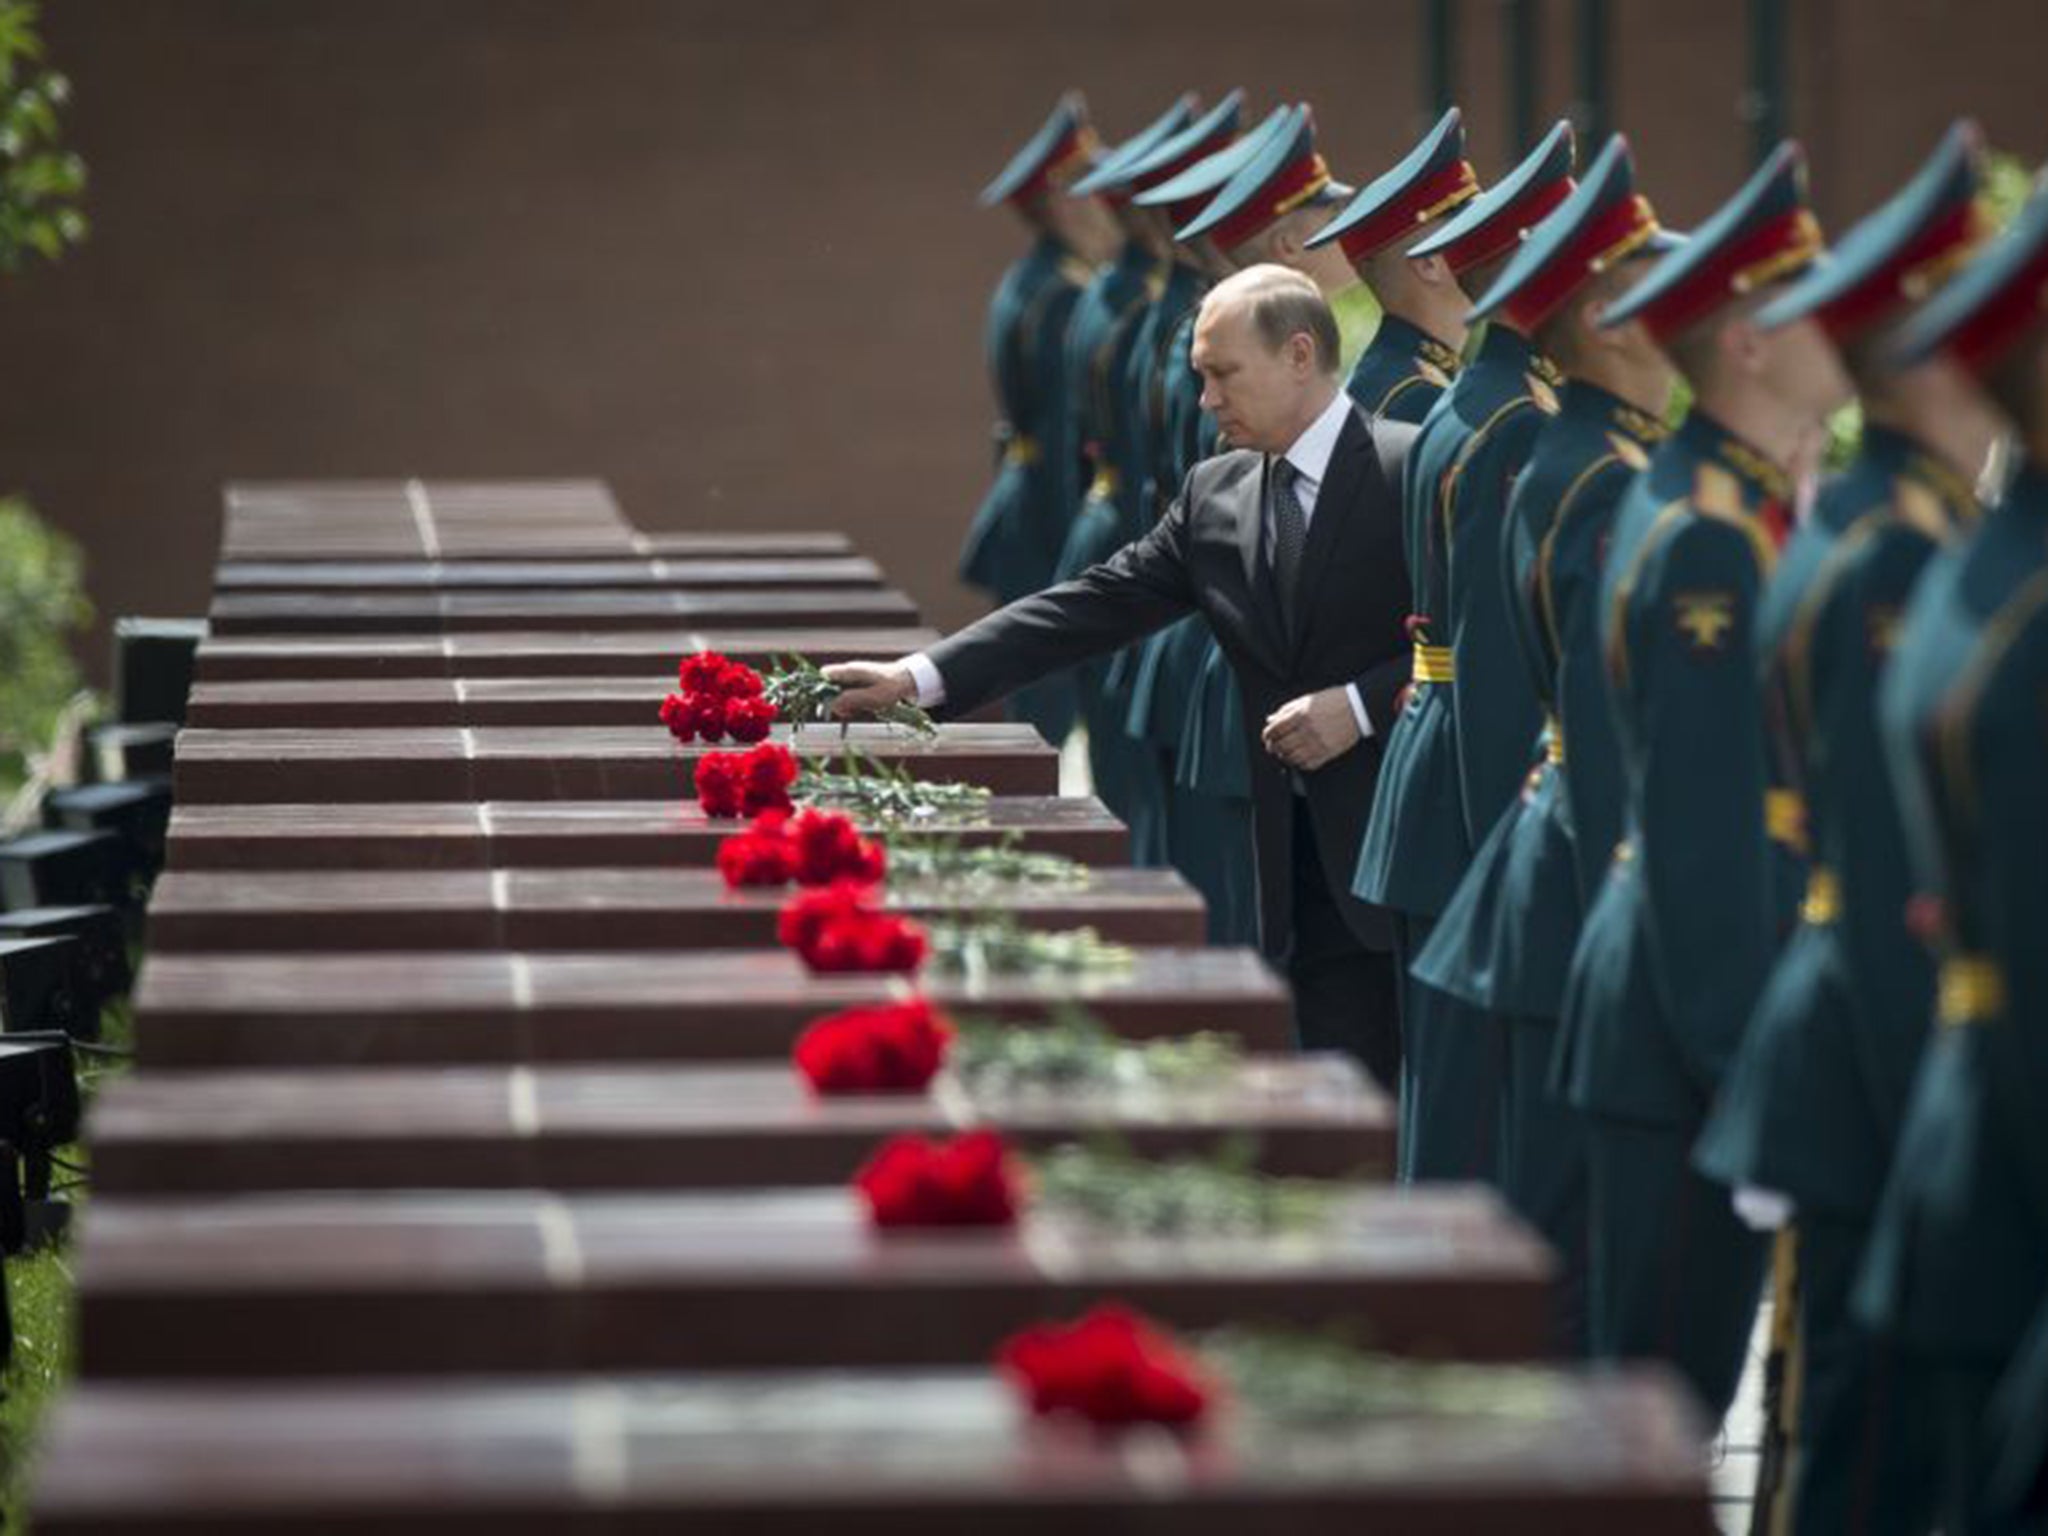 Vladimir Putin takes part in a wreath laying ceremony at the Tomb of the Unknown Soldier outside Moscow on Monday